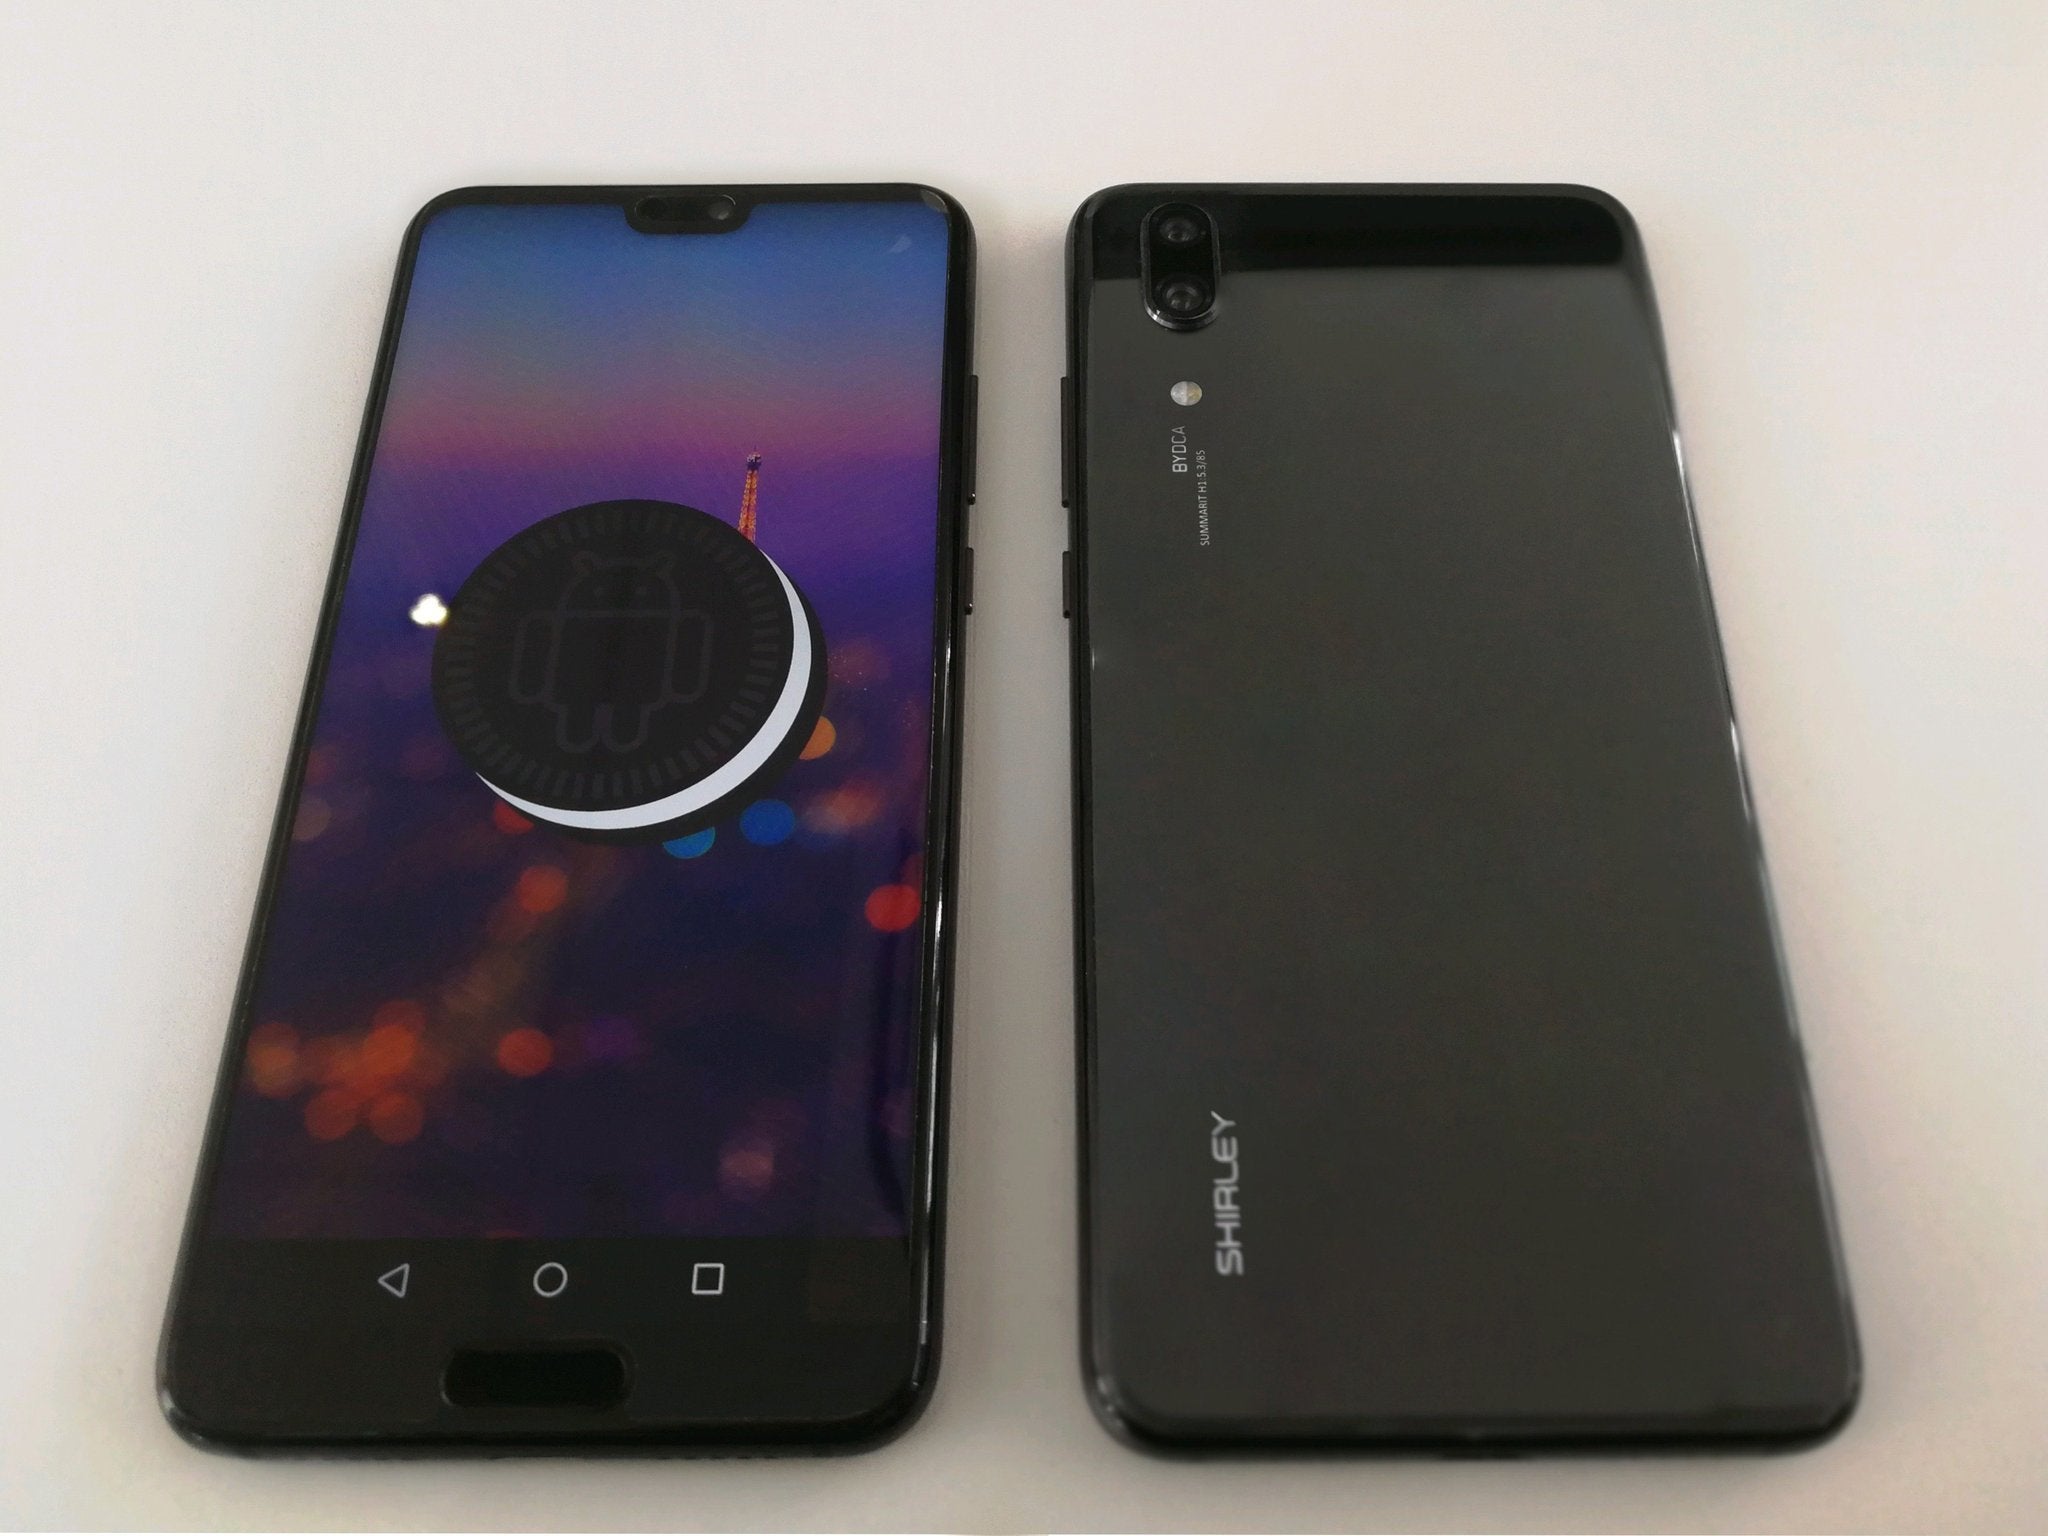 Fresh Huawei P20 leak from Evan Blass - Another Huawei P20 leak shows... a dual camera! The rollercoaster is intense